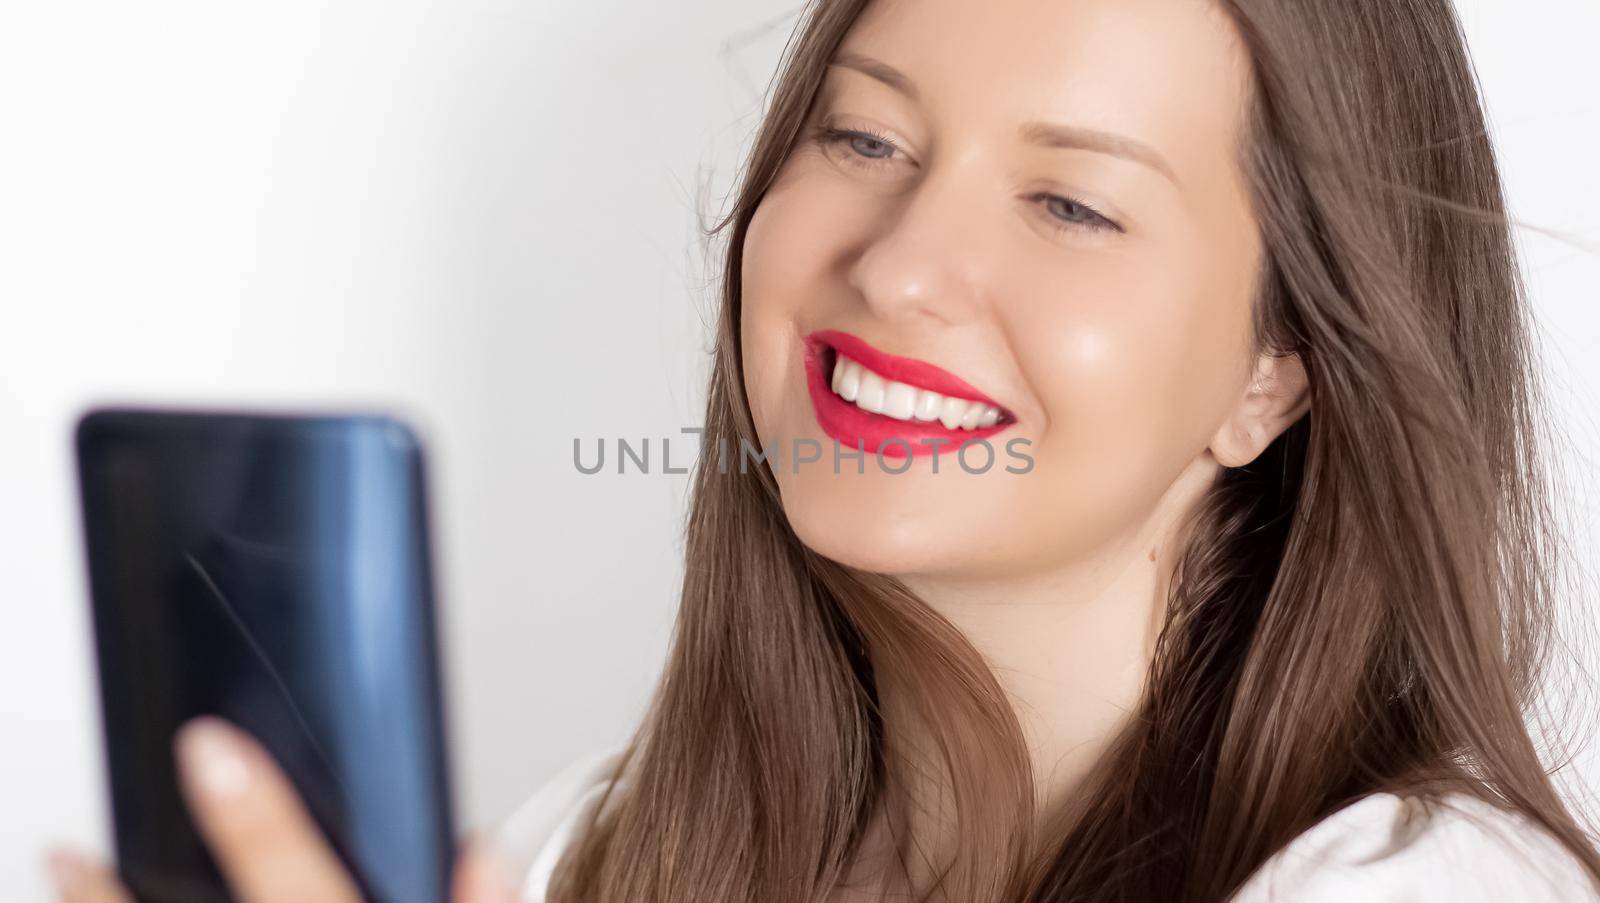 Happy smiling woman with smartphone having video call or taking selfie, portrait on white background. People, technology and communication concept.